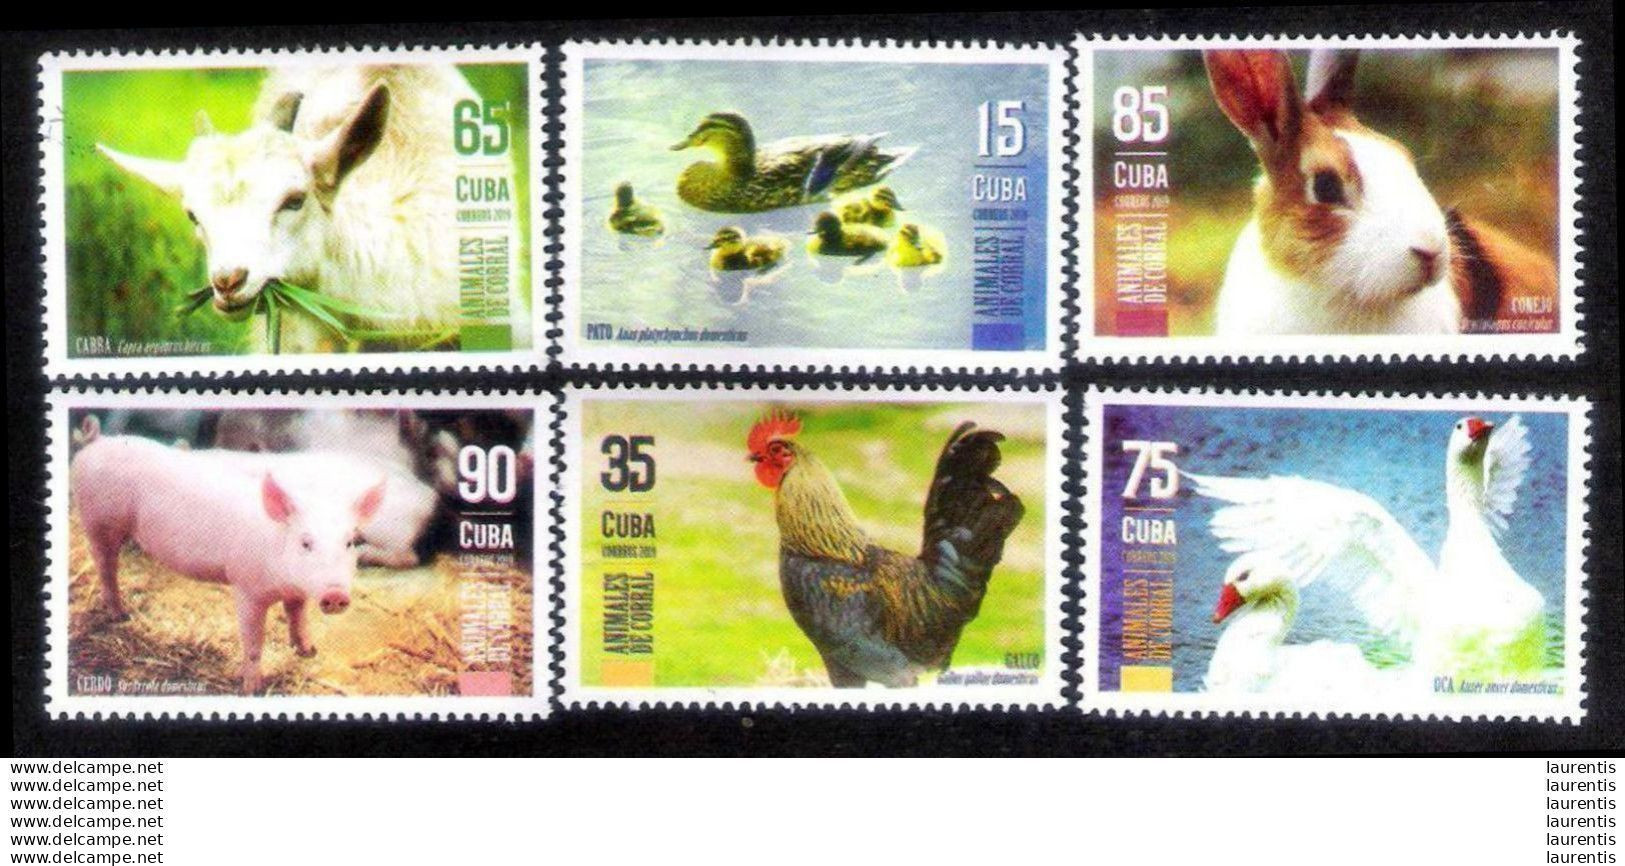 D2859  Ducks-Pigs-Roosters-Rabbits-Geese-Goats-Cows - 2019 - MNH - Cb - 2,25 - Farm